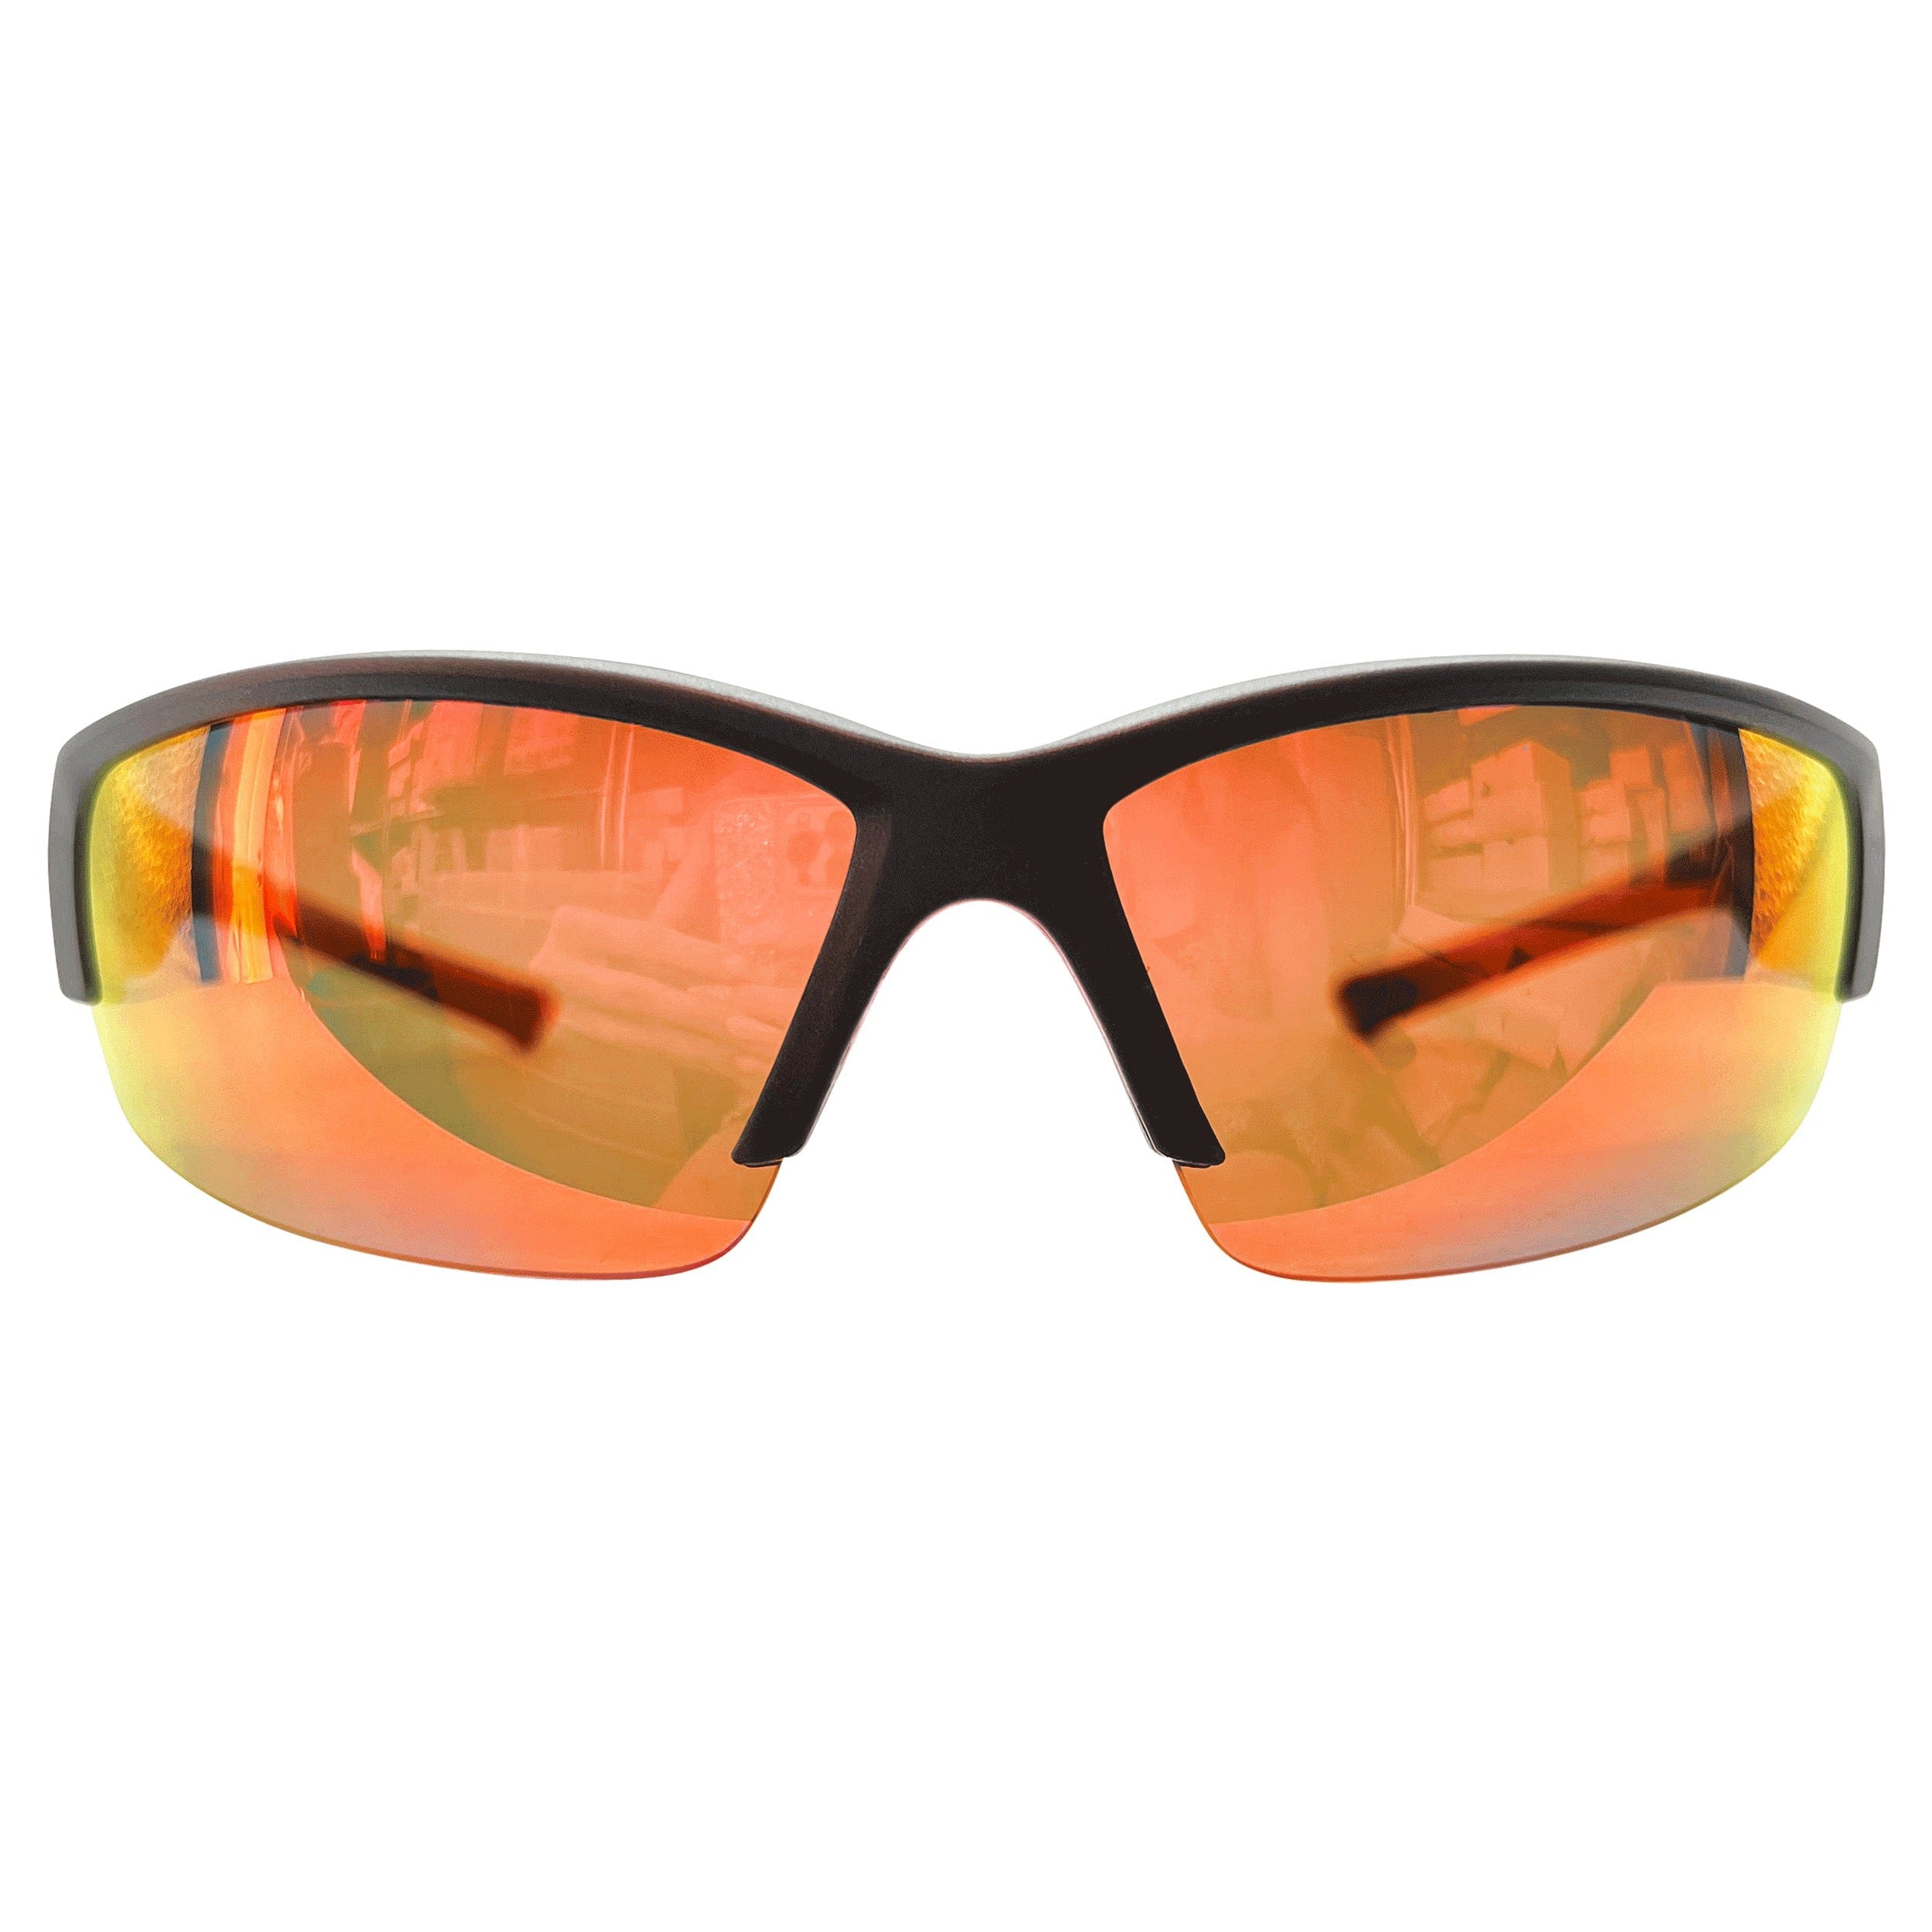 CONCEITED Orange RV/Silver Sports Sunglasses *As Seen On: Cassie*